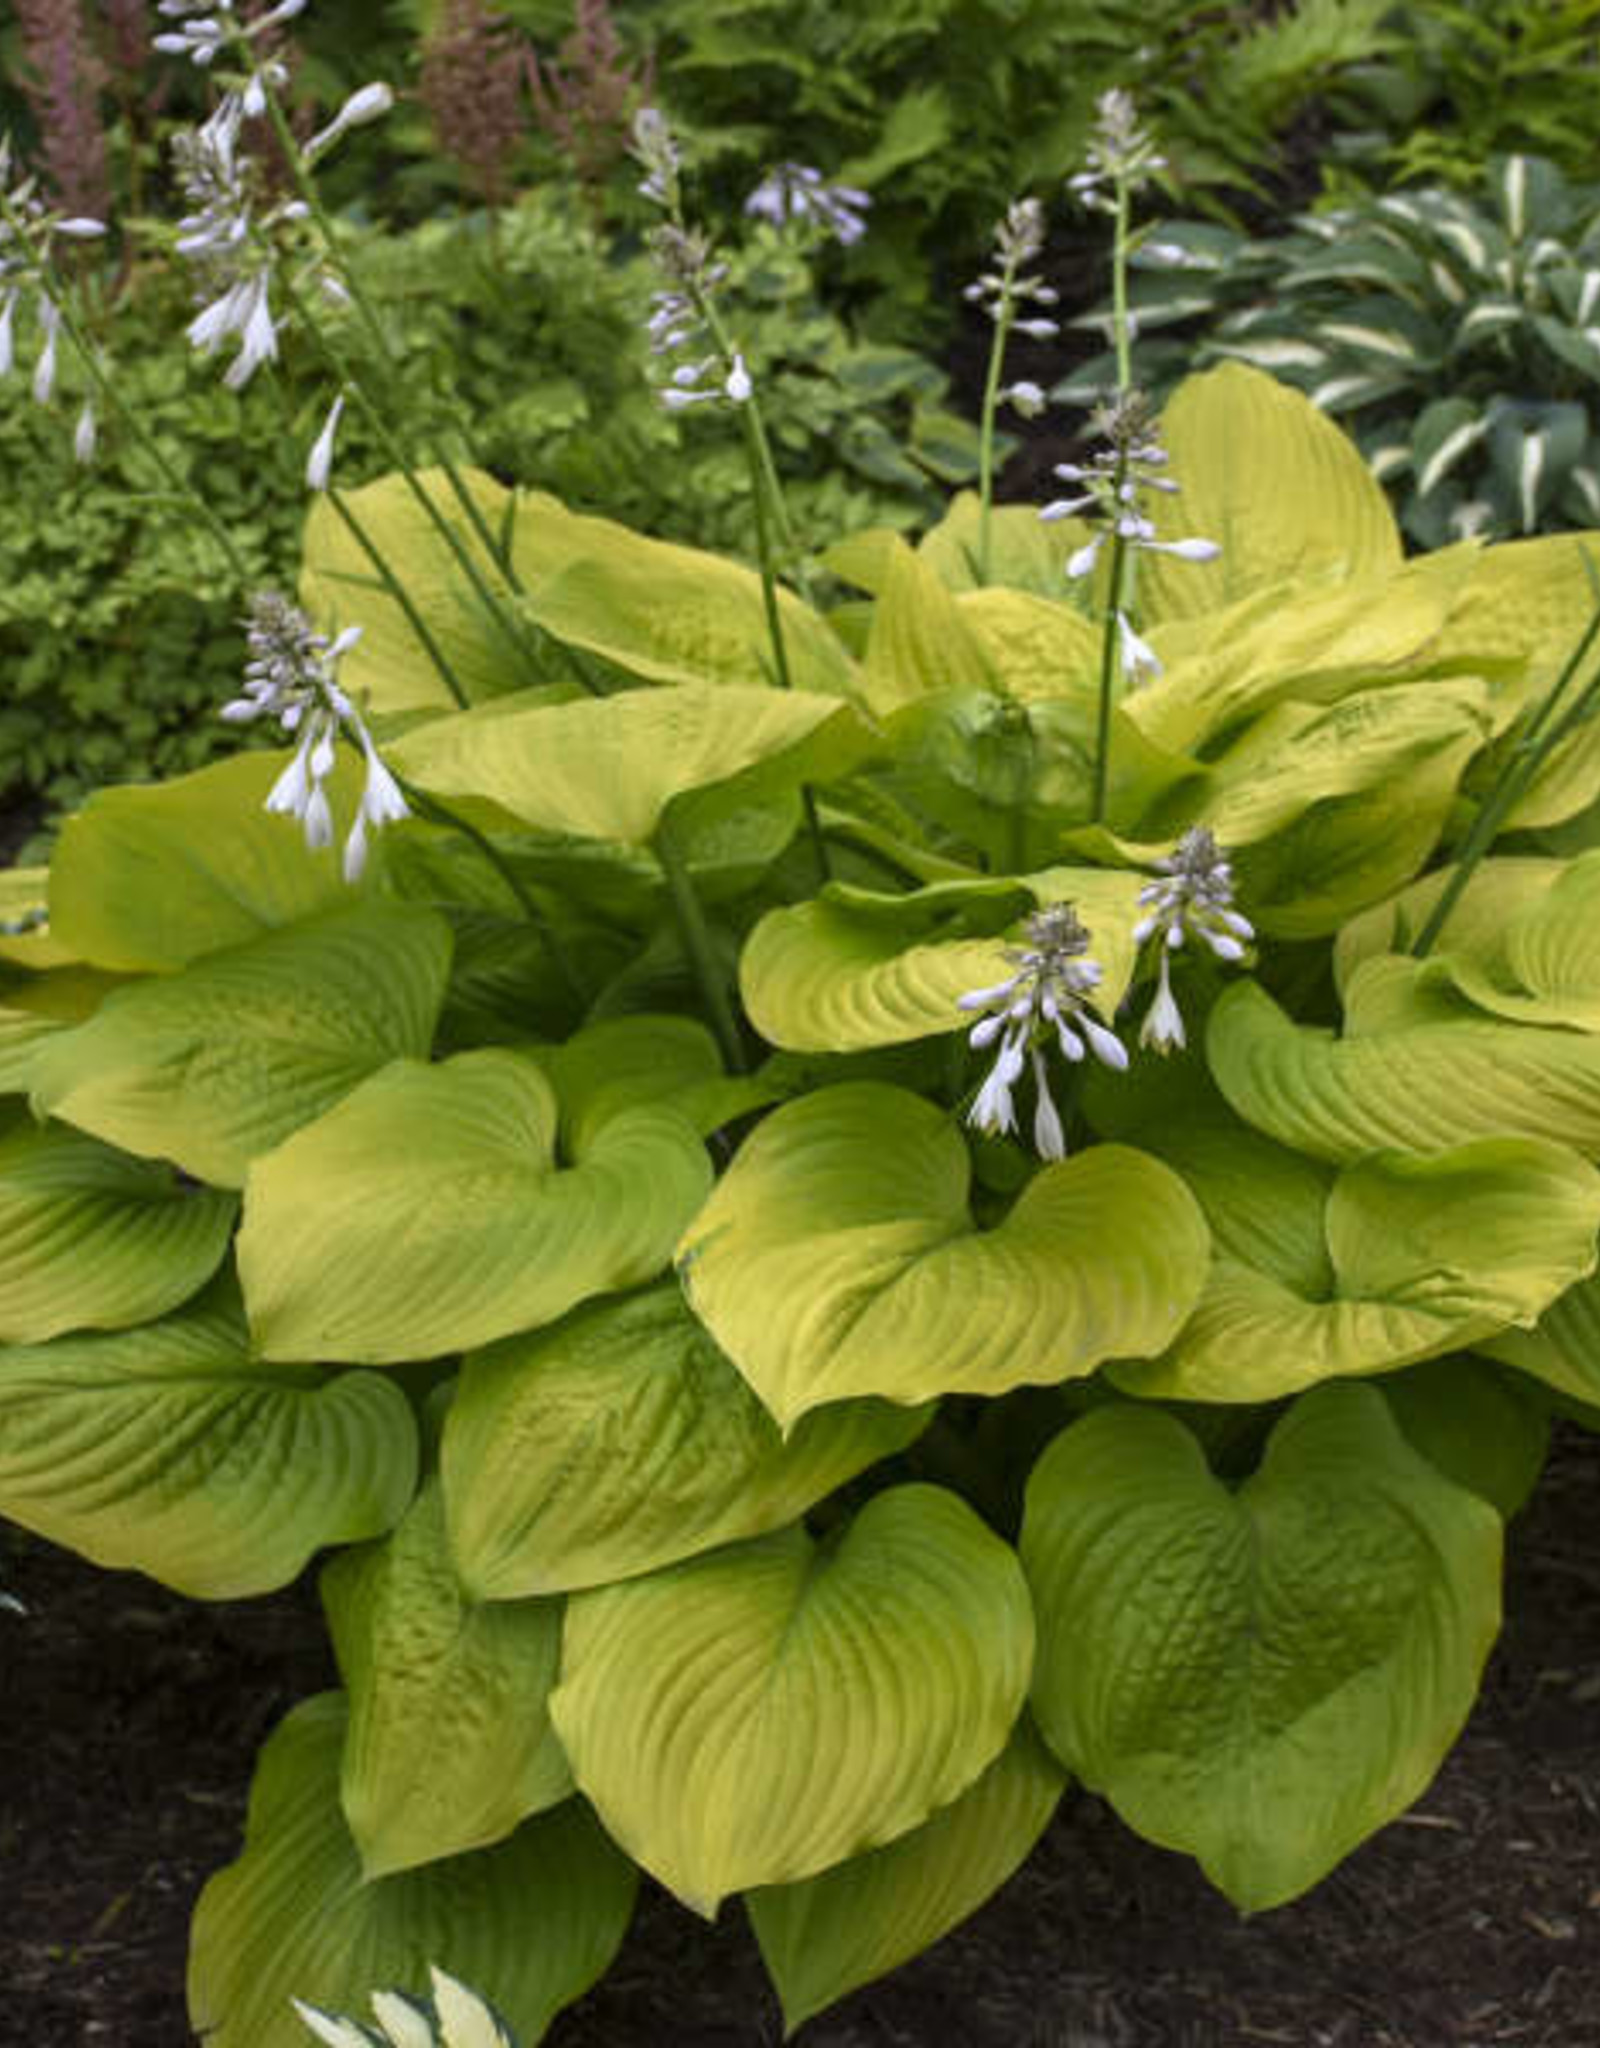 Walters Gardens Hosta 'Age of Gold' 5.5in